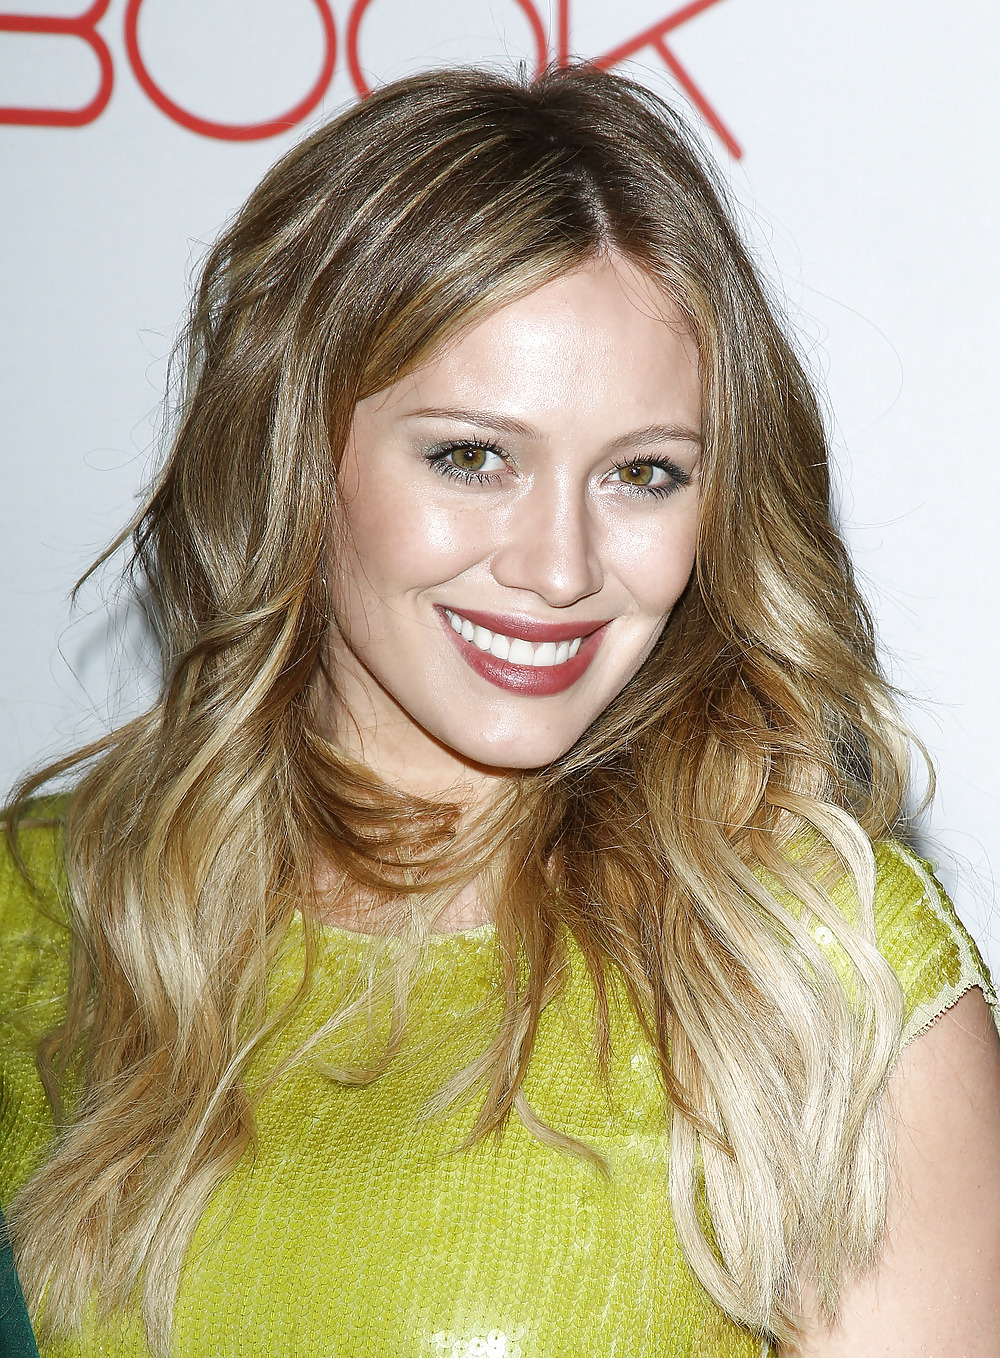 Hilary Duff Beauty Book For Brain Cancer launch #6234443